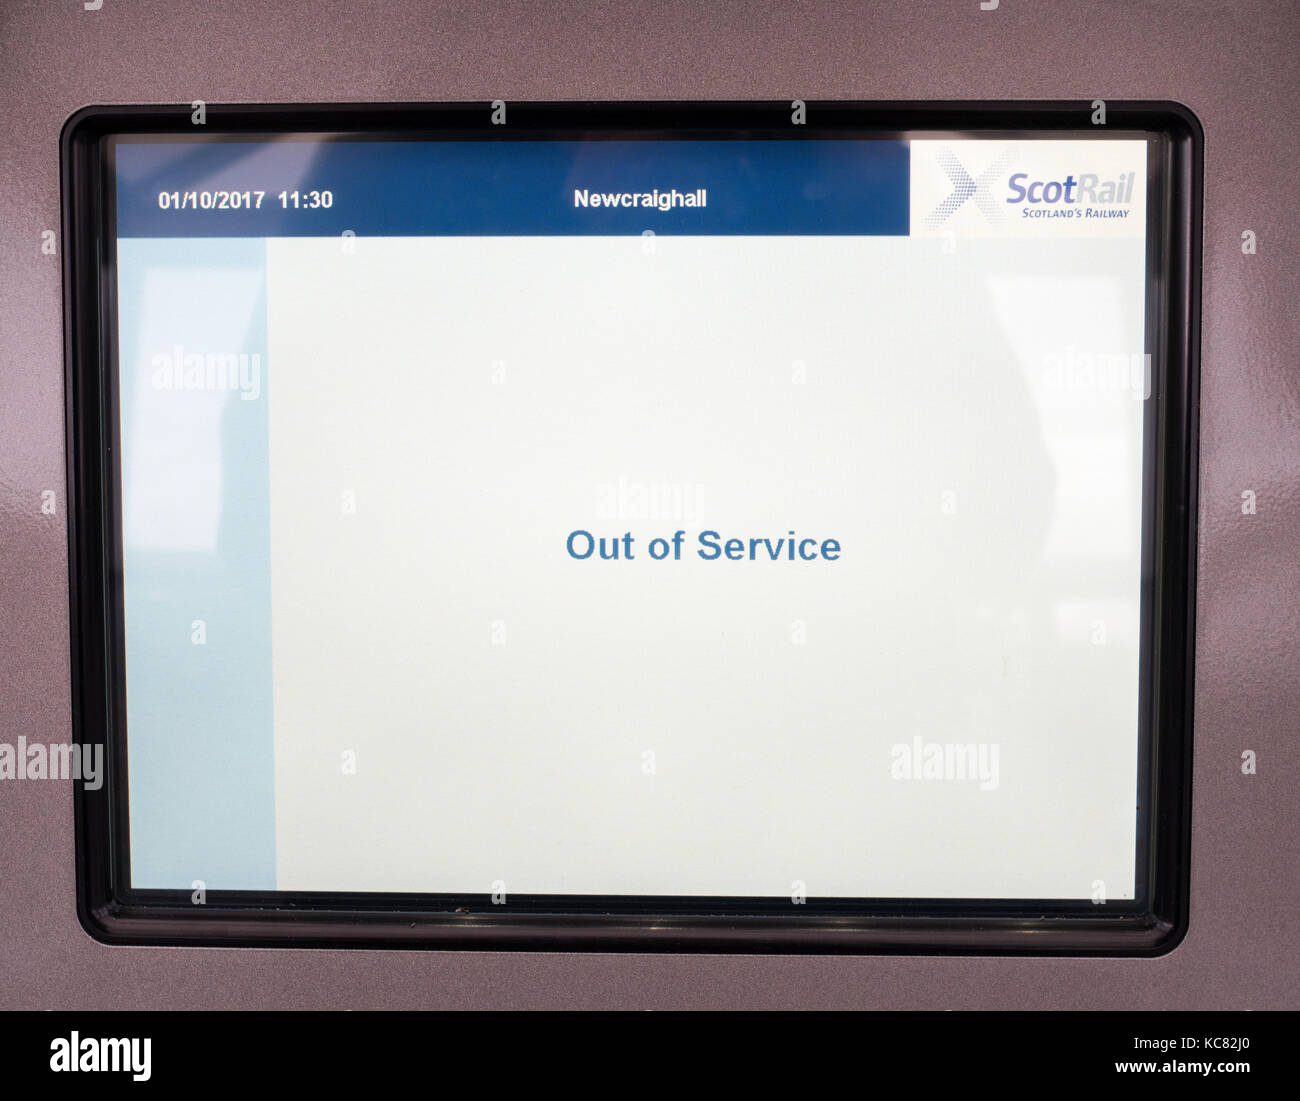 Scotrail ticket vending machine Out of Service, Newcraighall, Scotland, UK Stock Photo